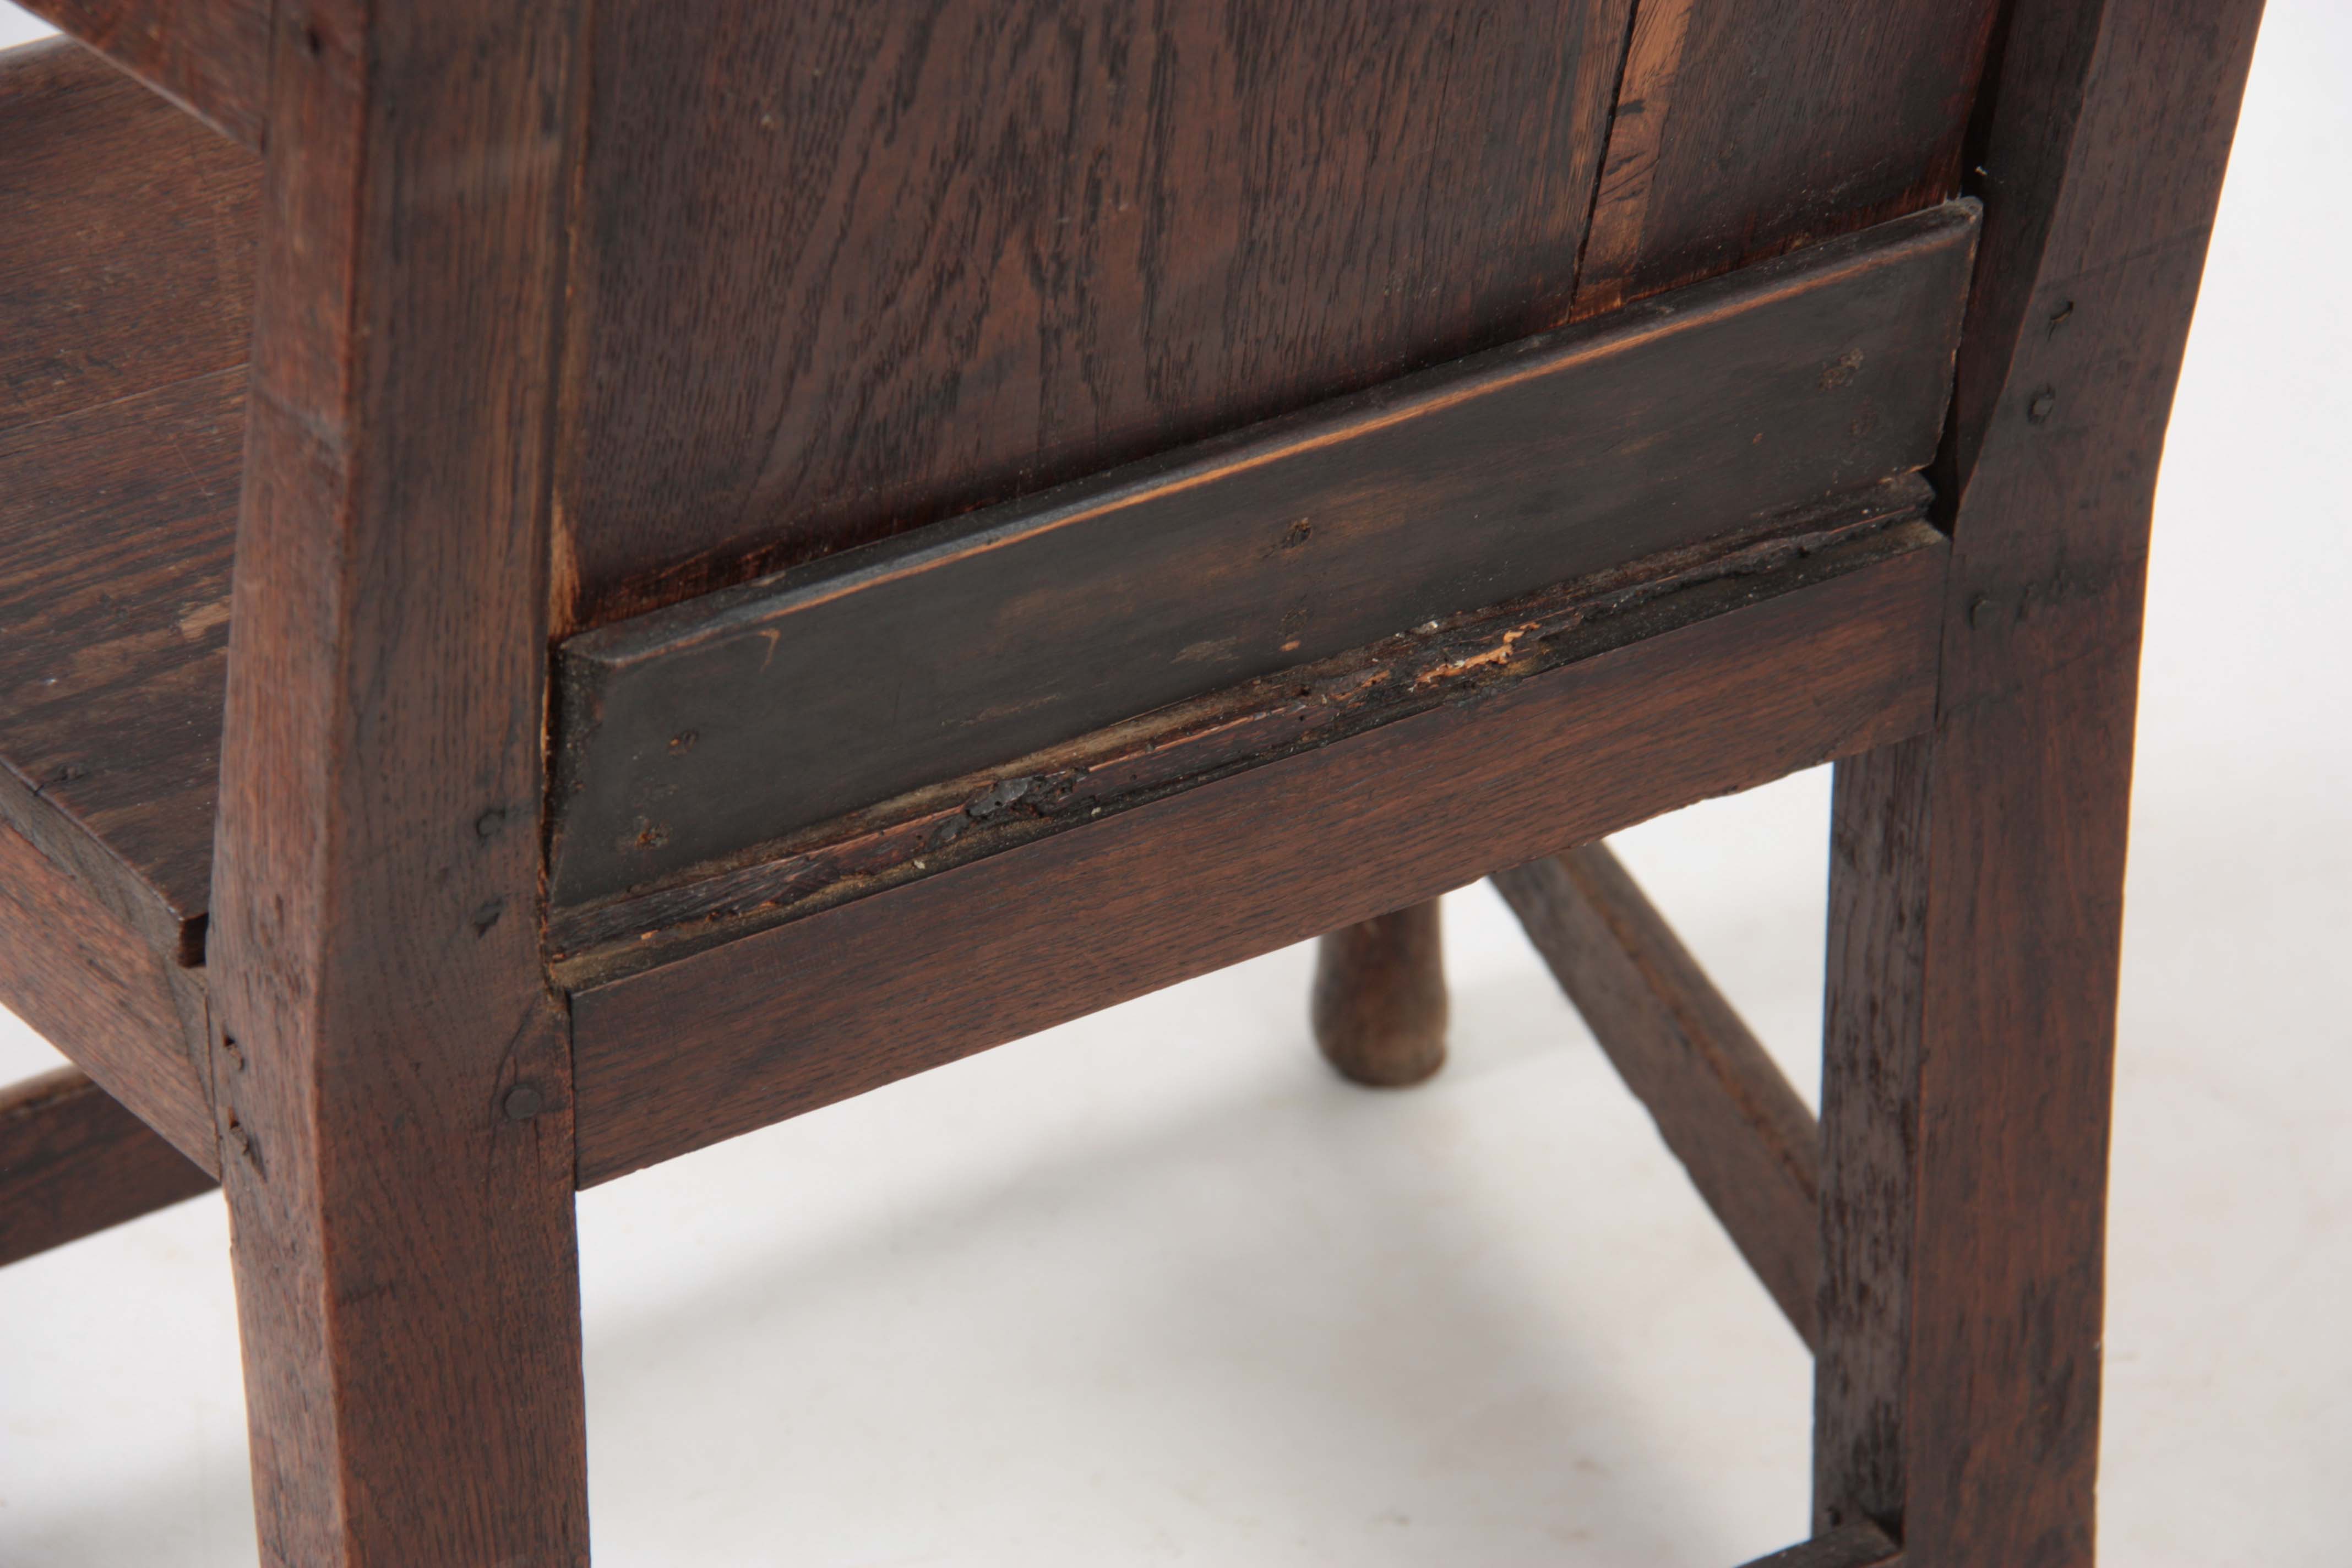 AN EARLY 18TH CENTURY OAK WAINSCOT CHAIR having fielded panel back with open arms and turned - Image 5 of 5